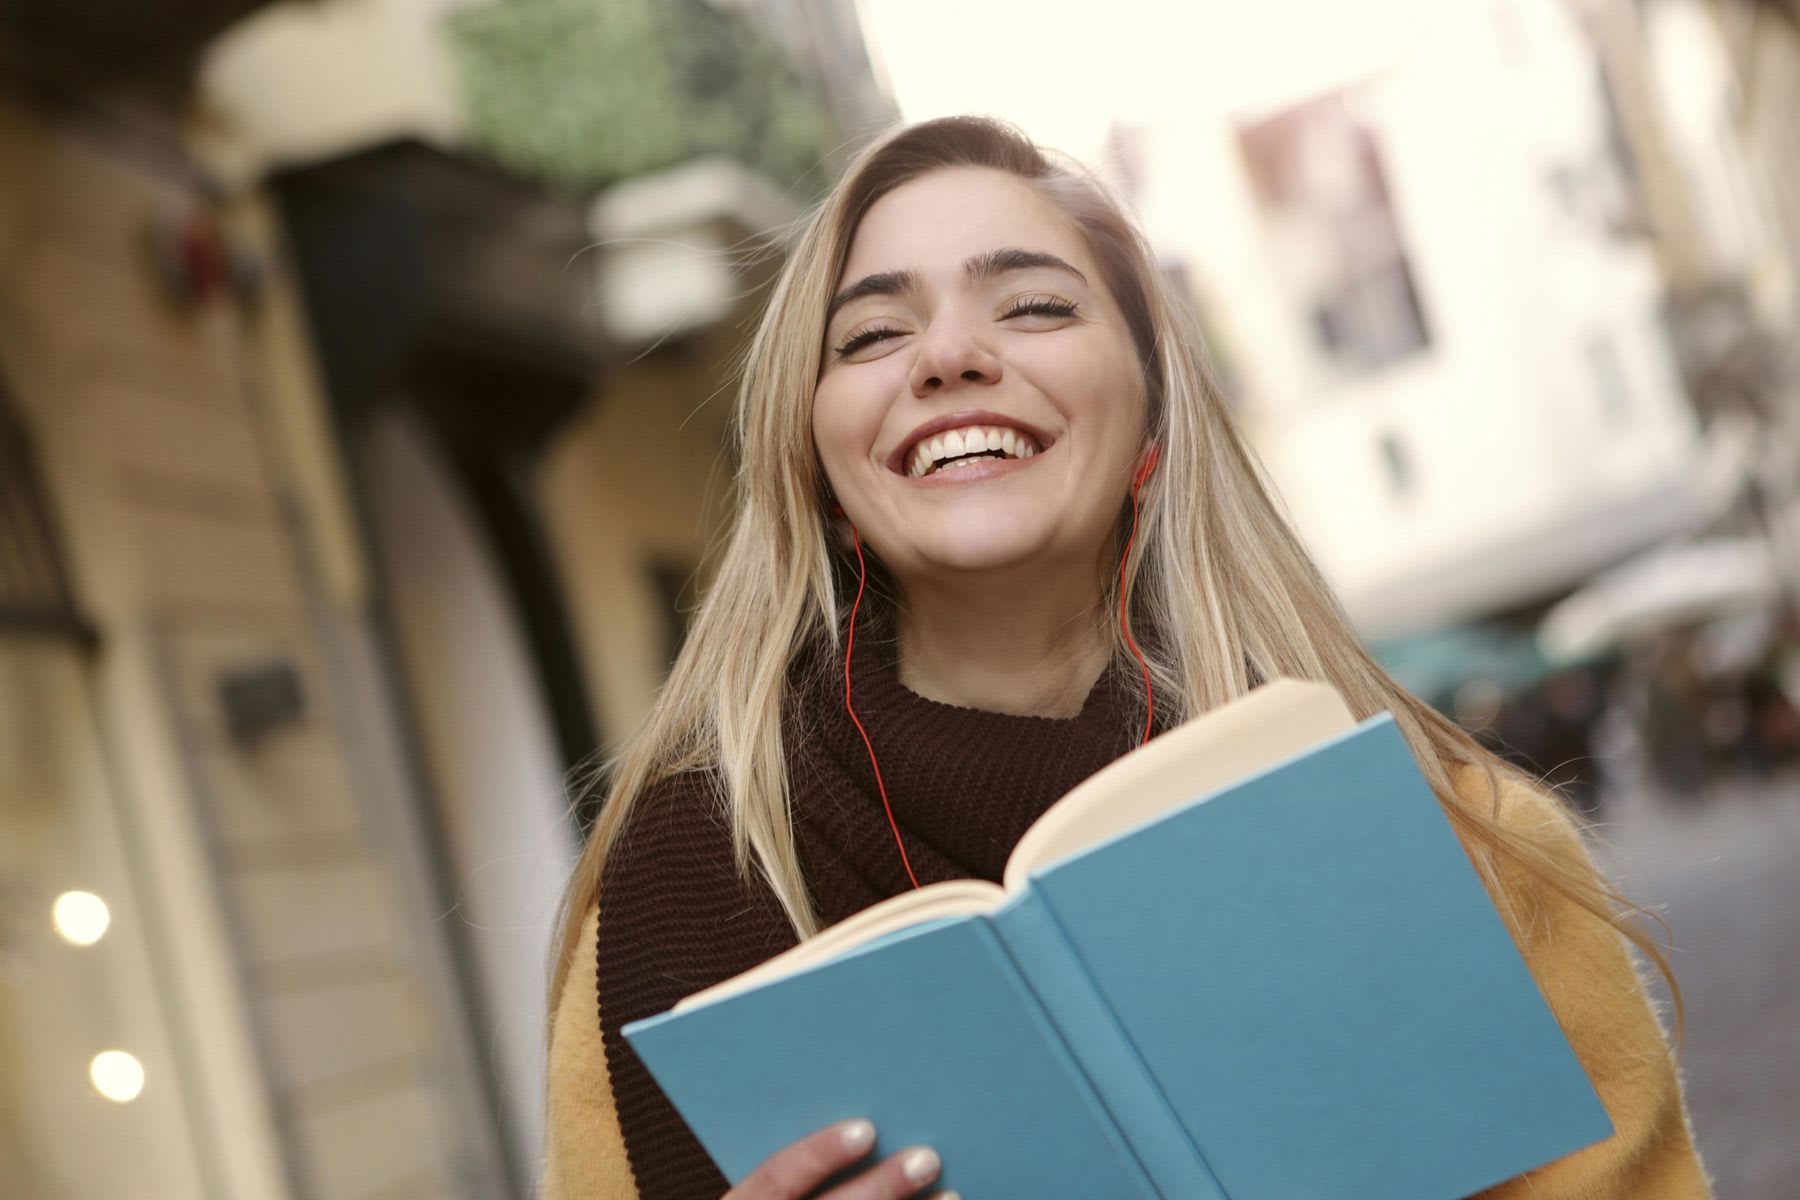 Woman smiling wide while listening to her earphones and holding a blue notebook